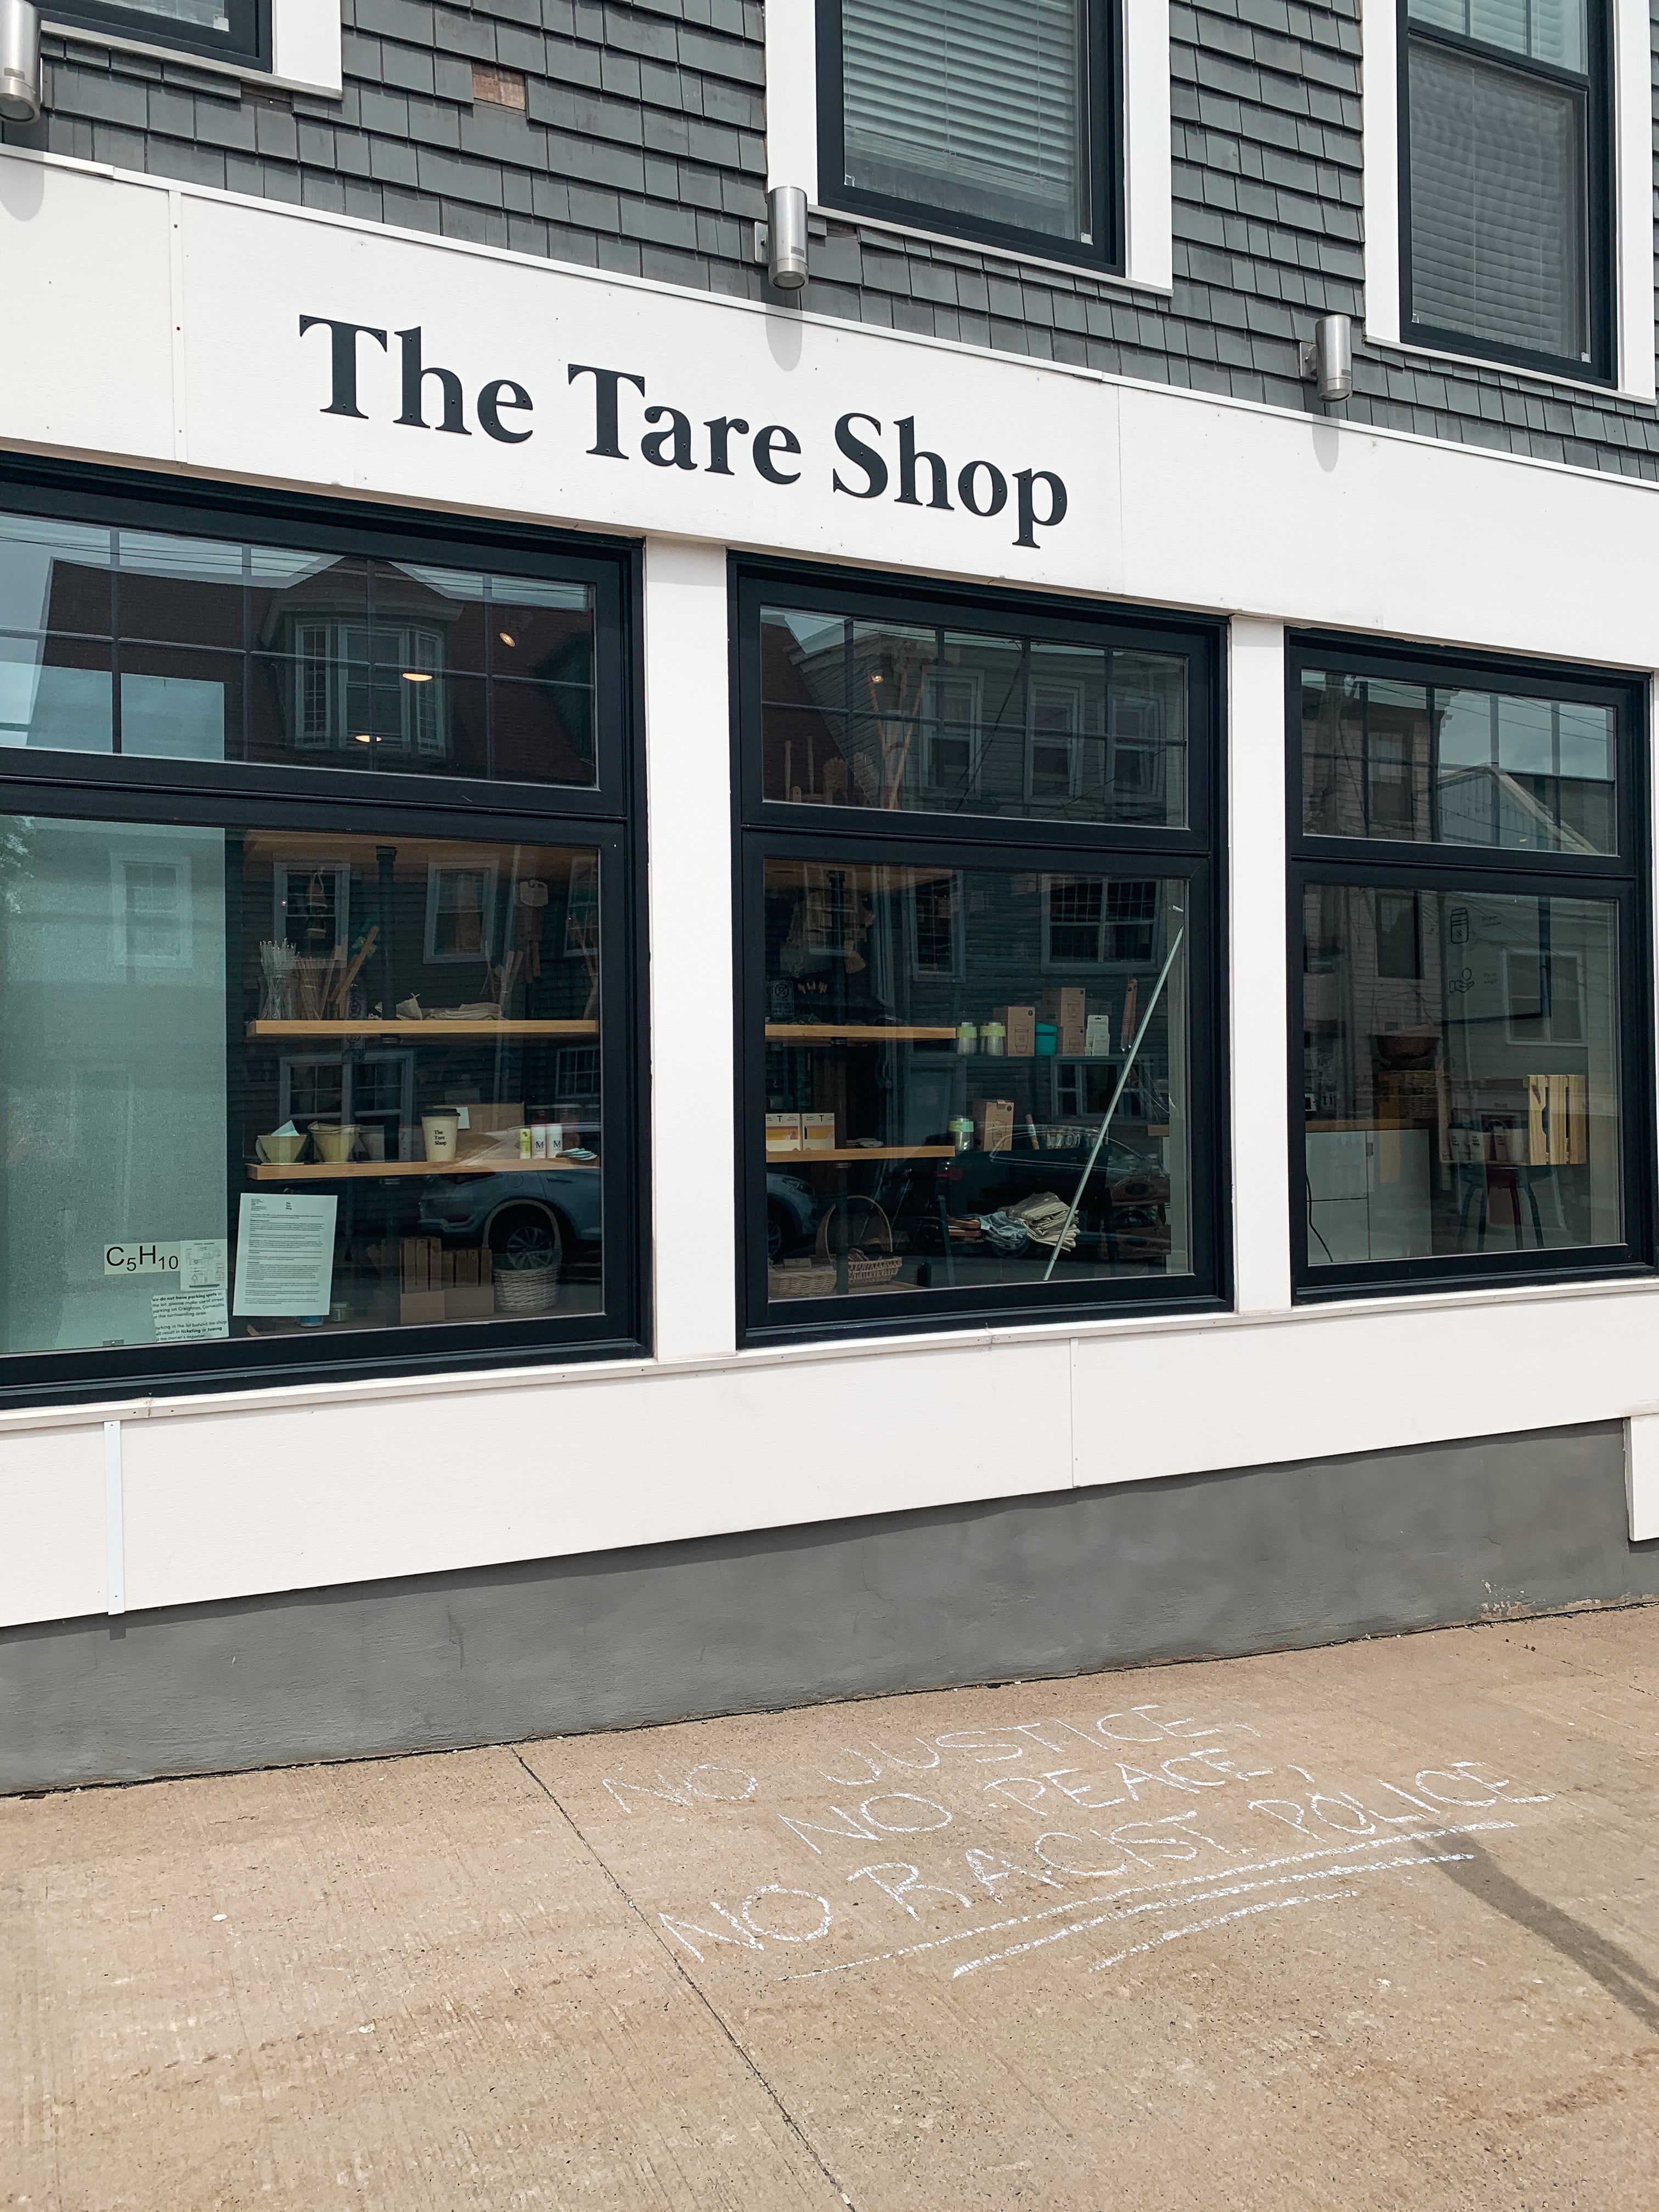 The Tare Shop sign sits in black above the windows of the Halifax store.